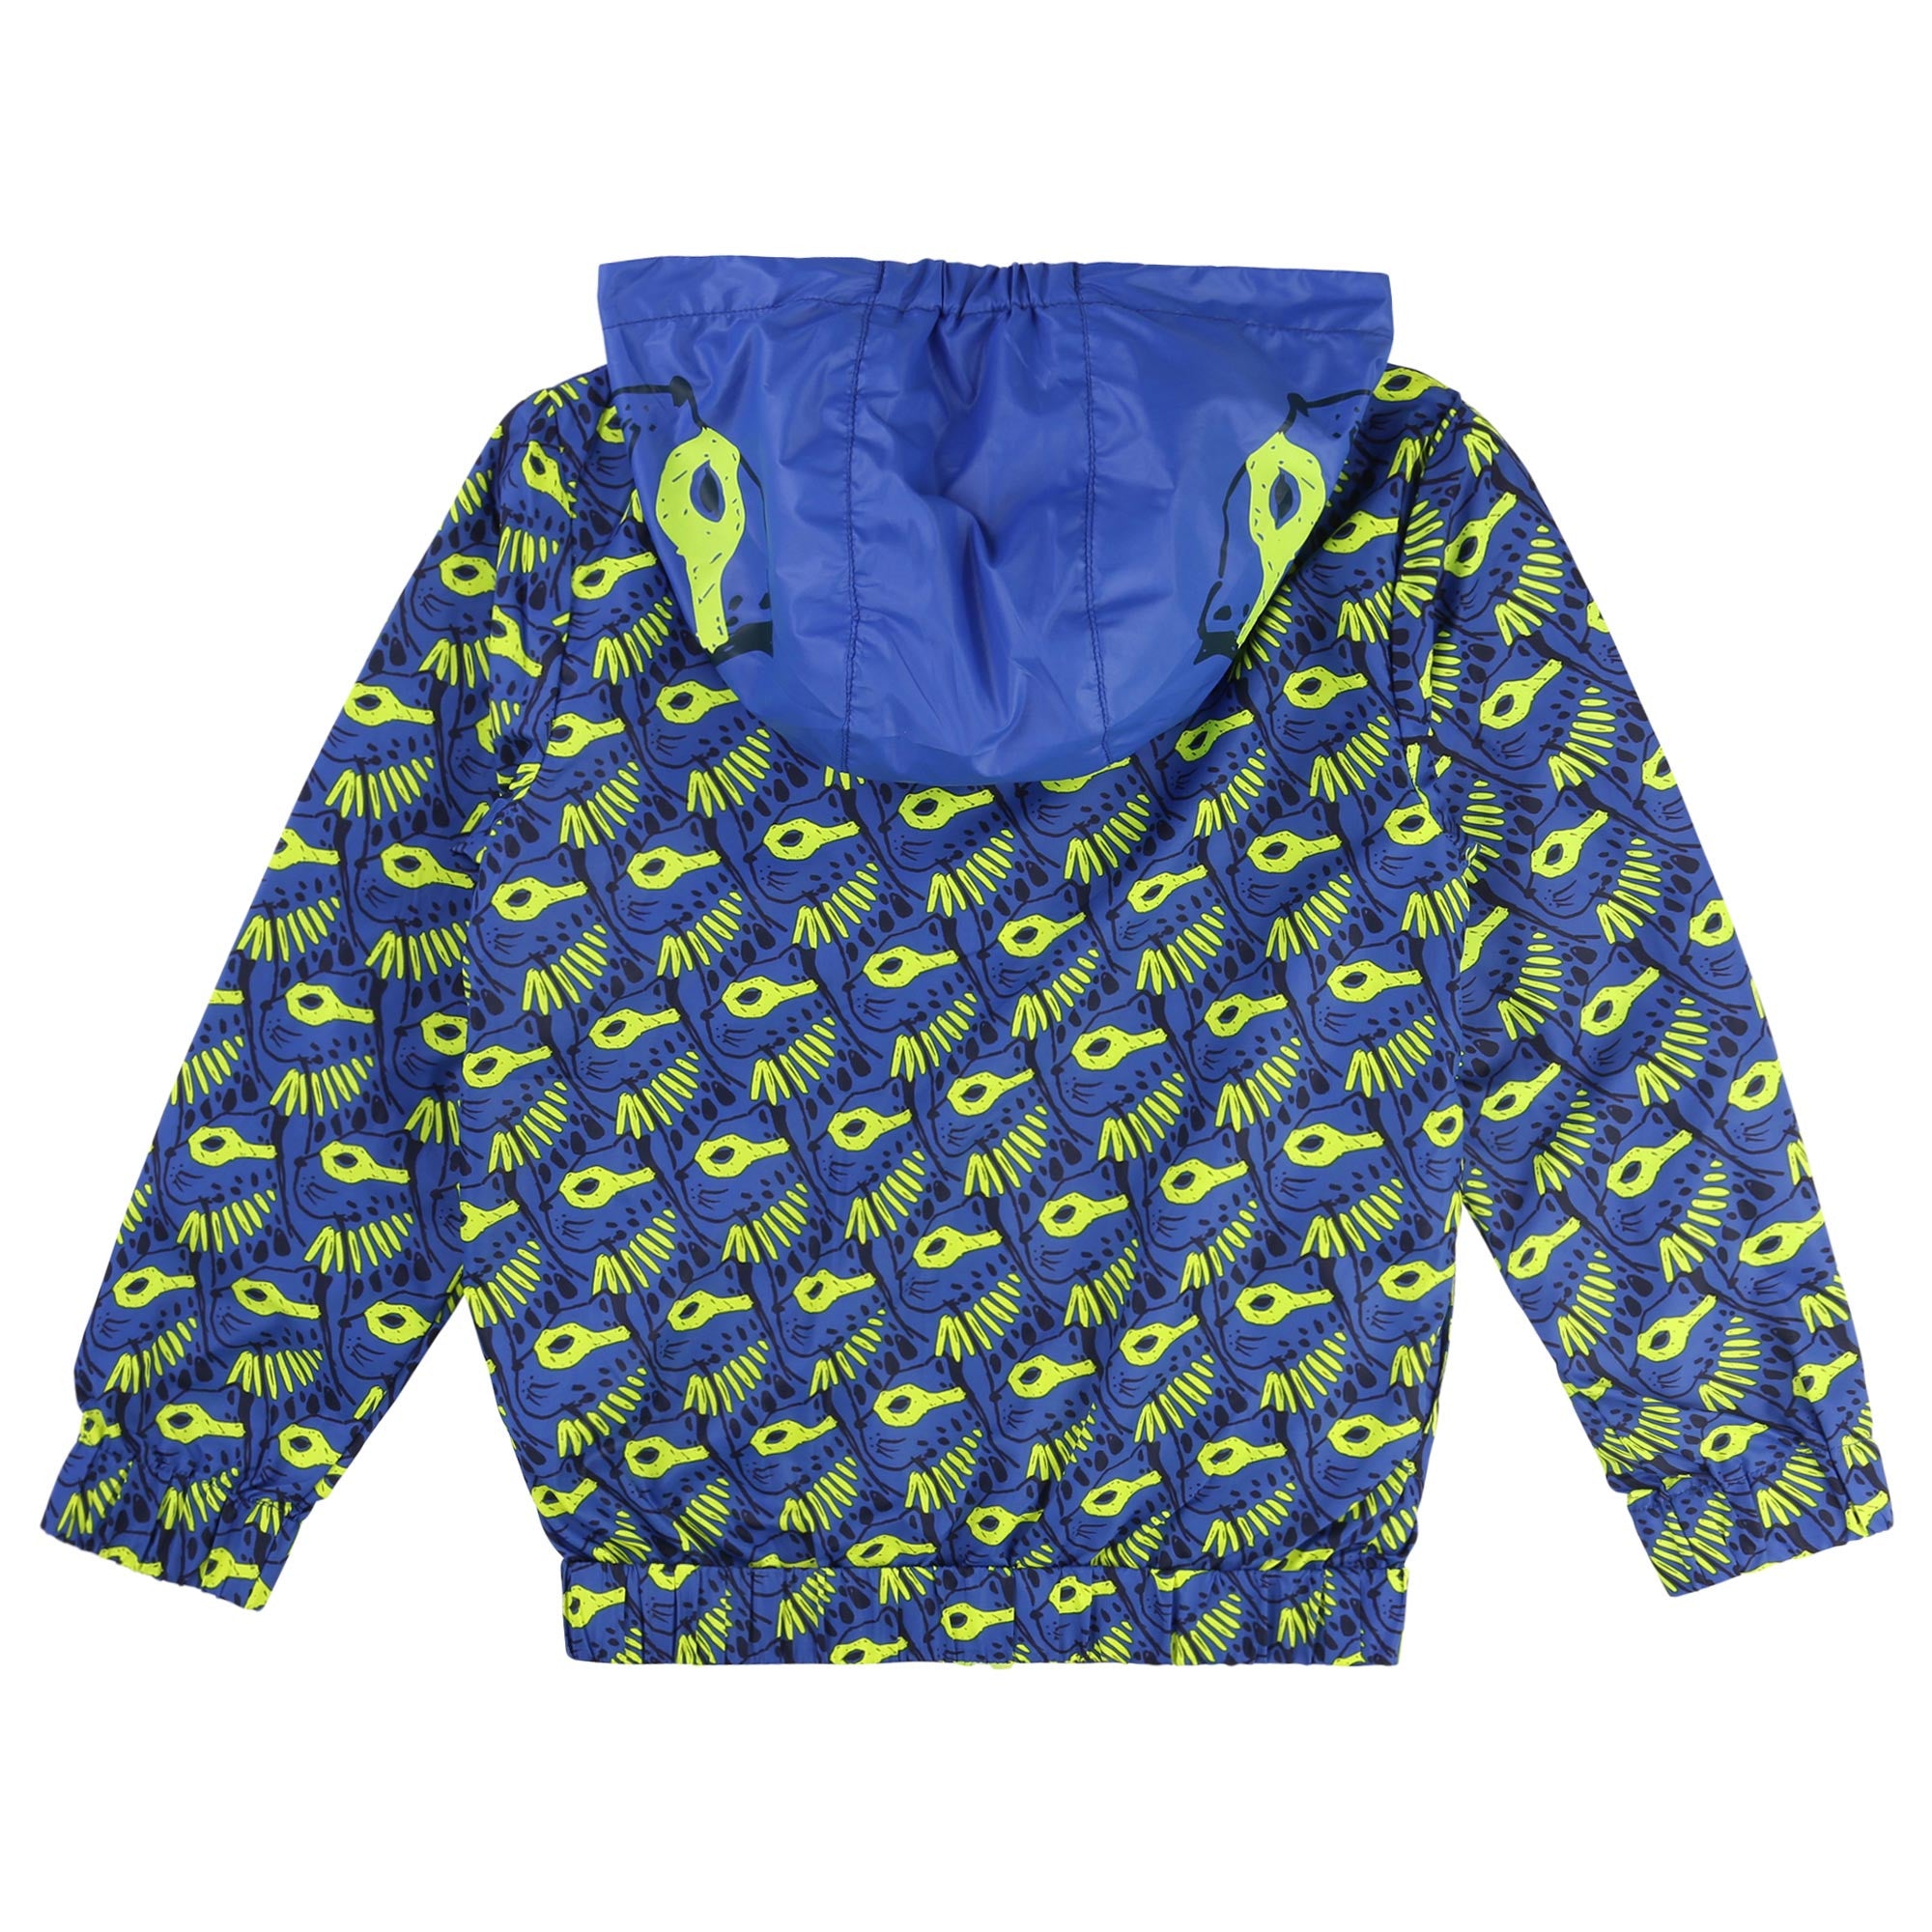 Boys Blue Leopard Jacket with Yellow Mask